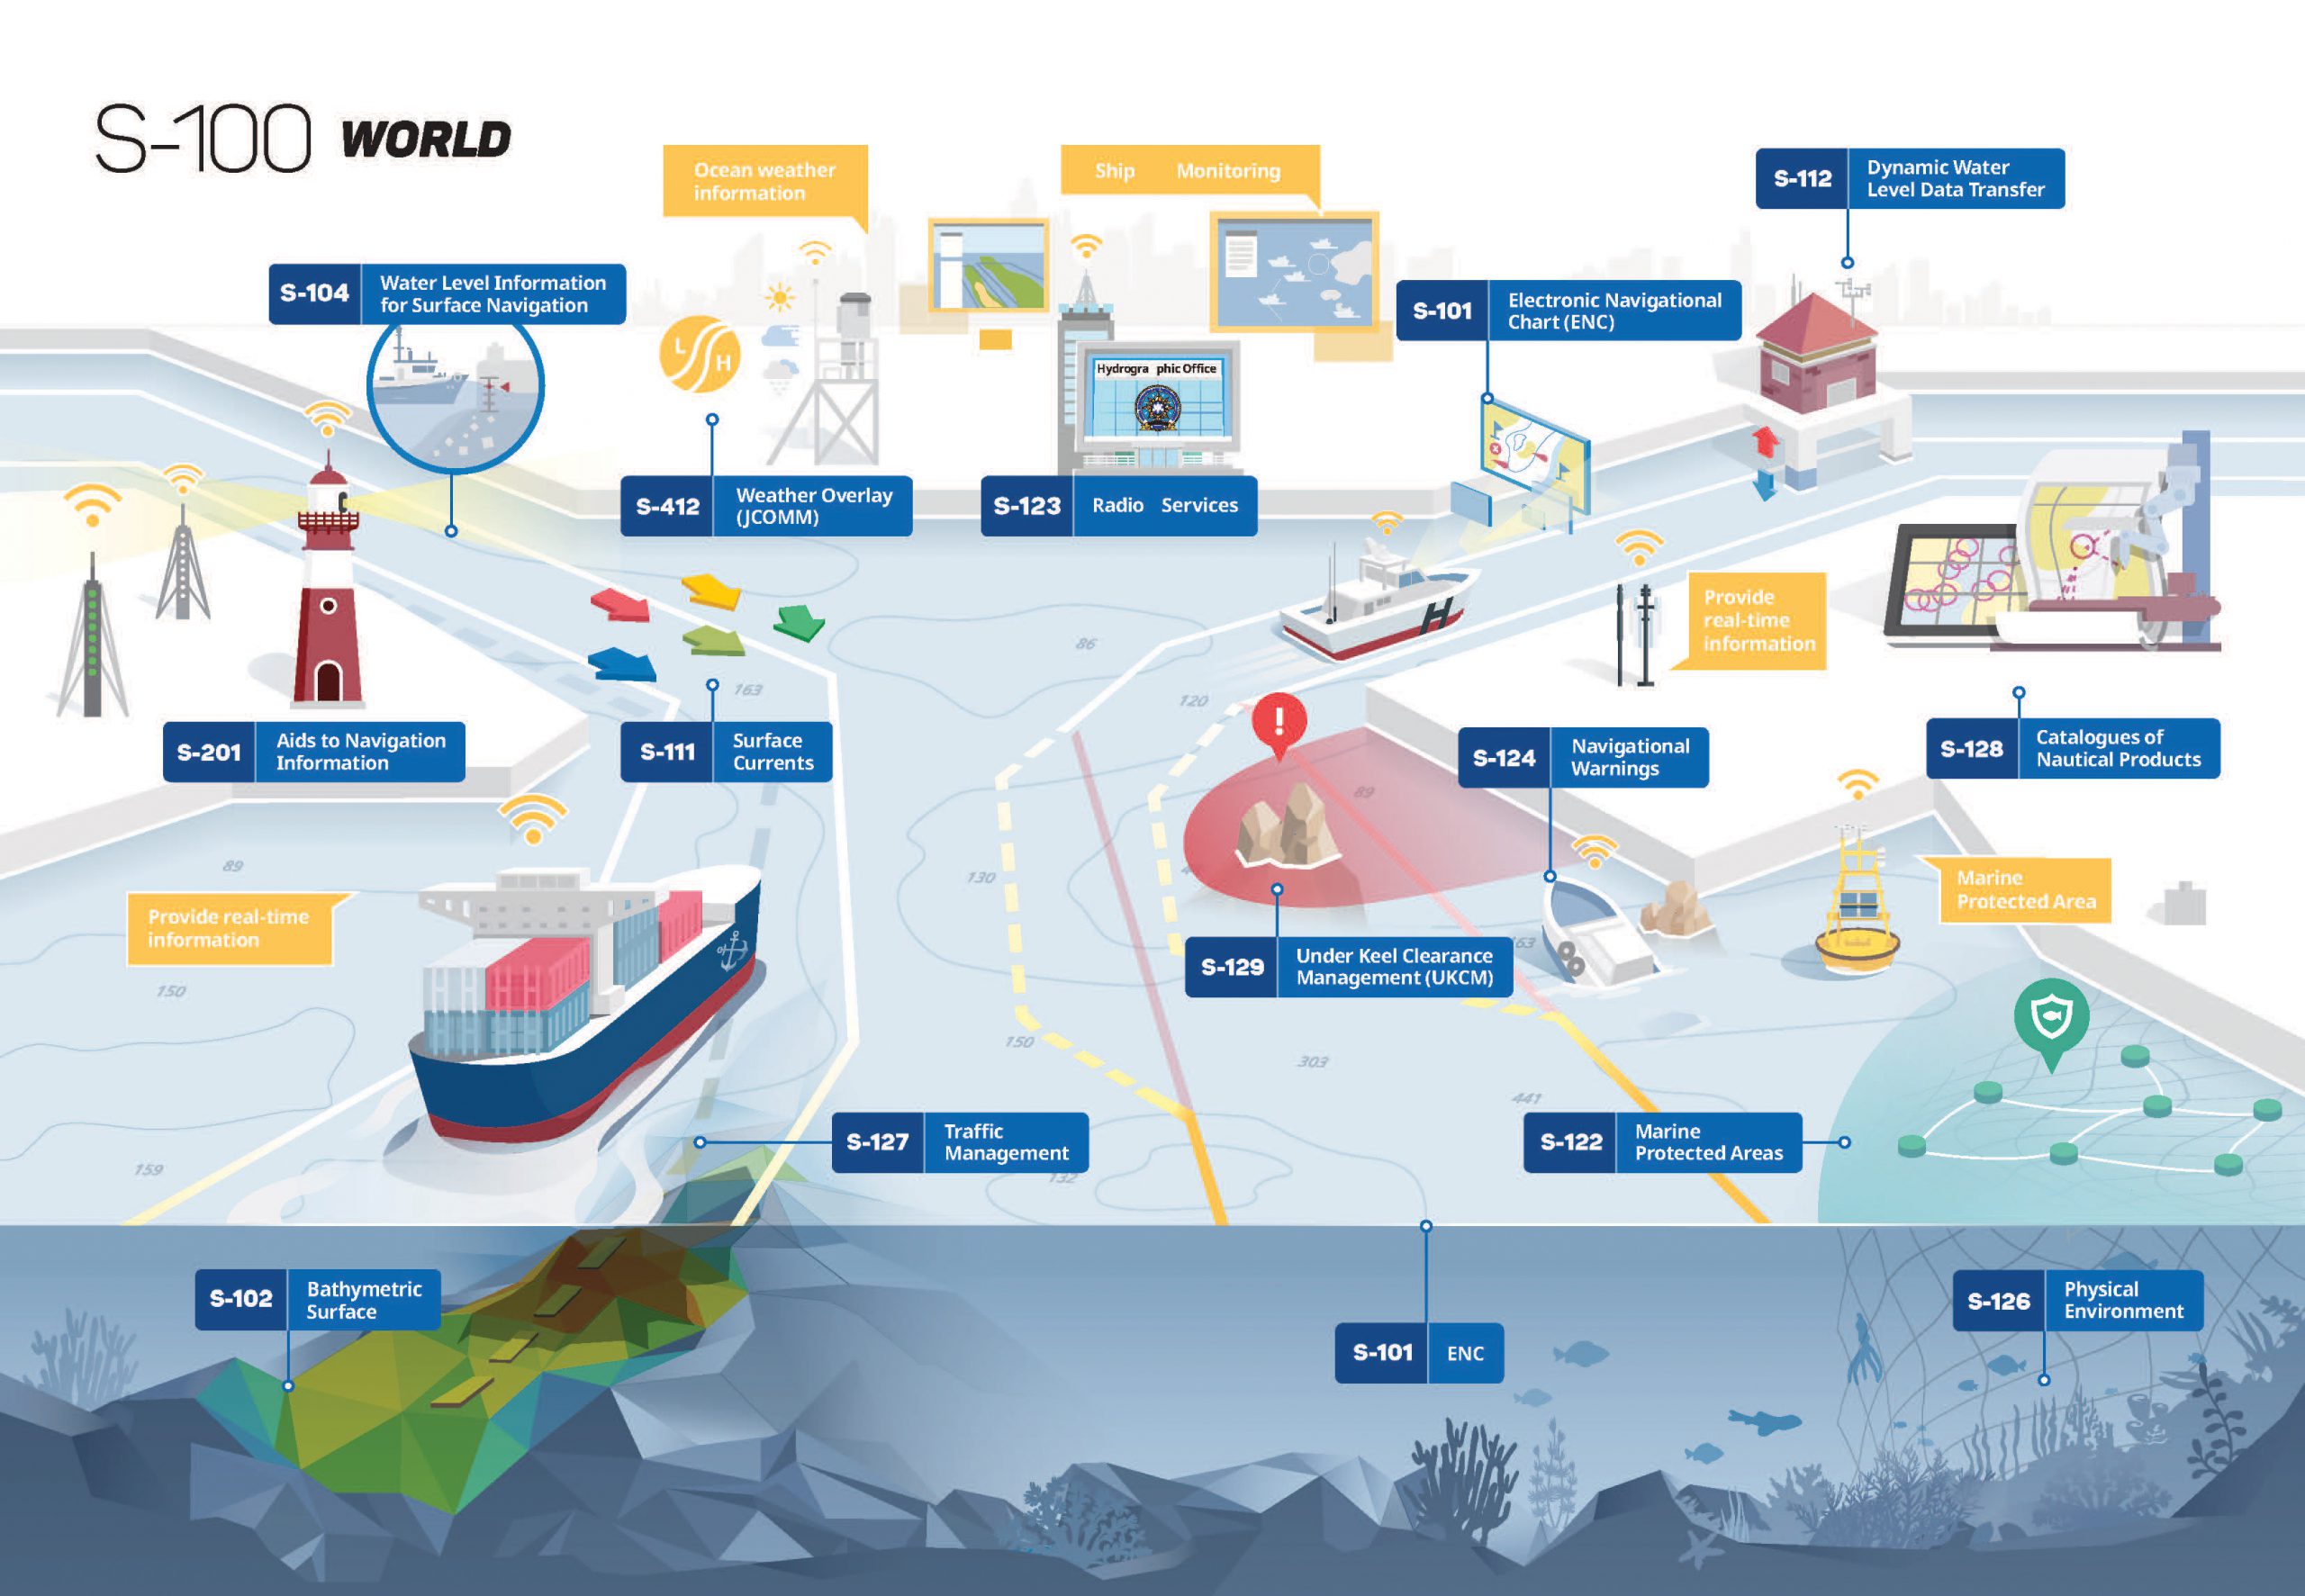 Navigation products that follow the updated S-100 framework will allow many aspects of maritime navigation to be better connected. Image credit: Korea Hydrographic and Oceanographic Agency